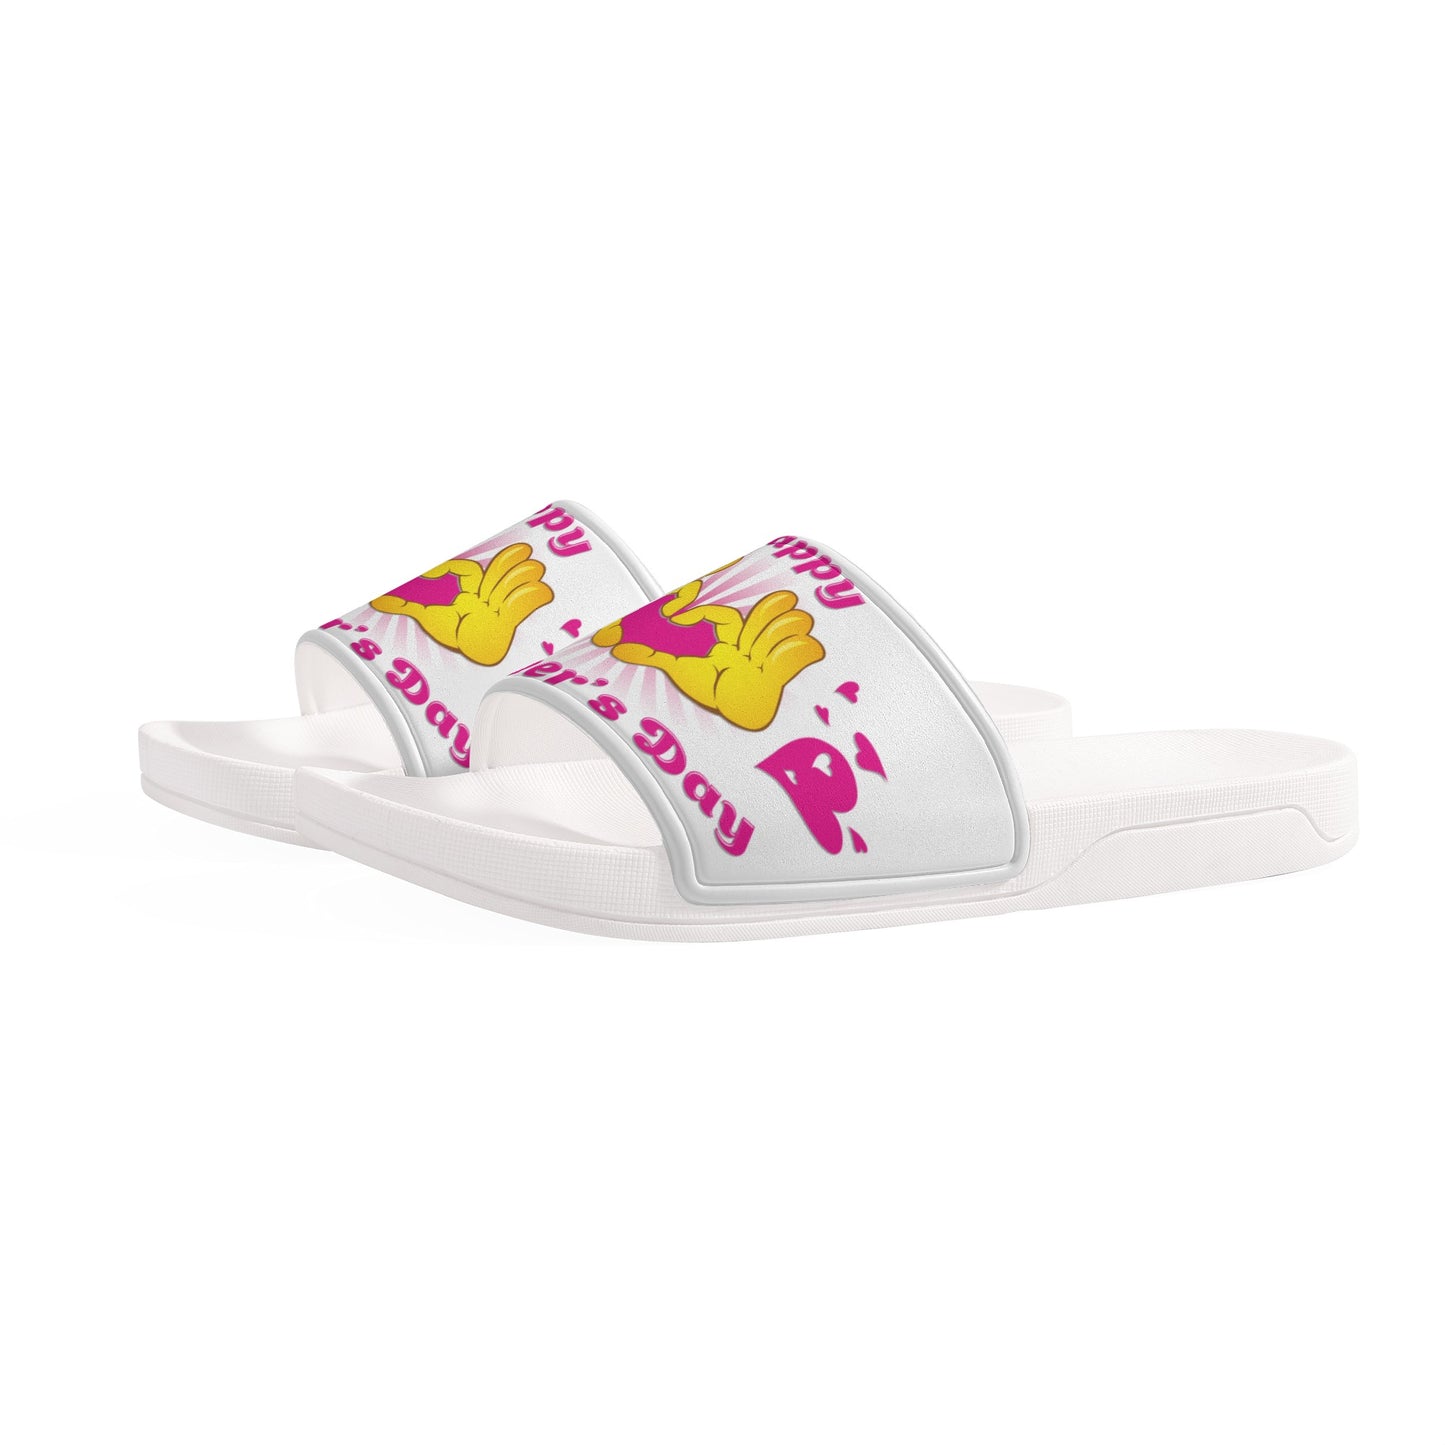 Give Mom A Gift of Love With These Womens Slide Sandals Shoes